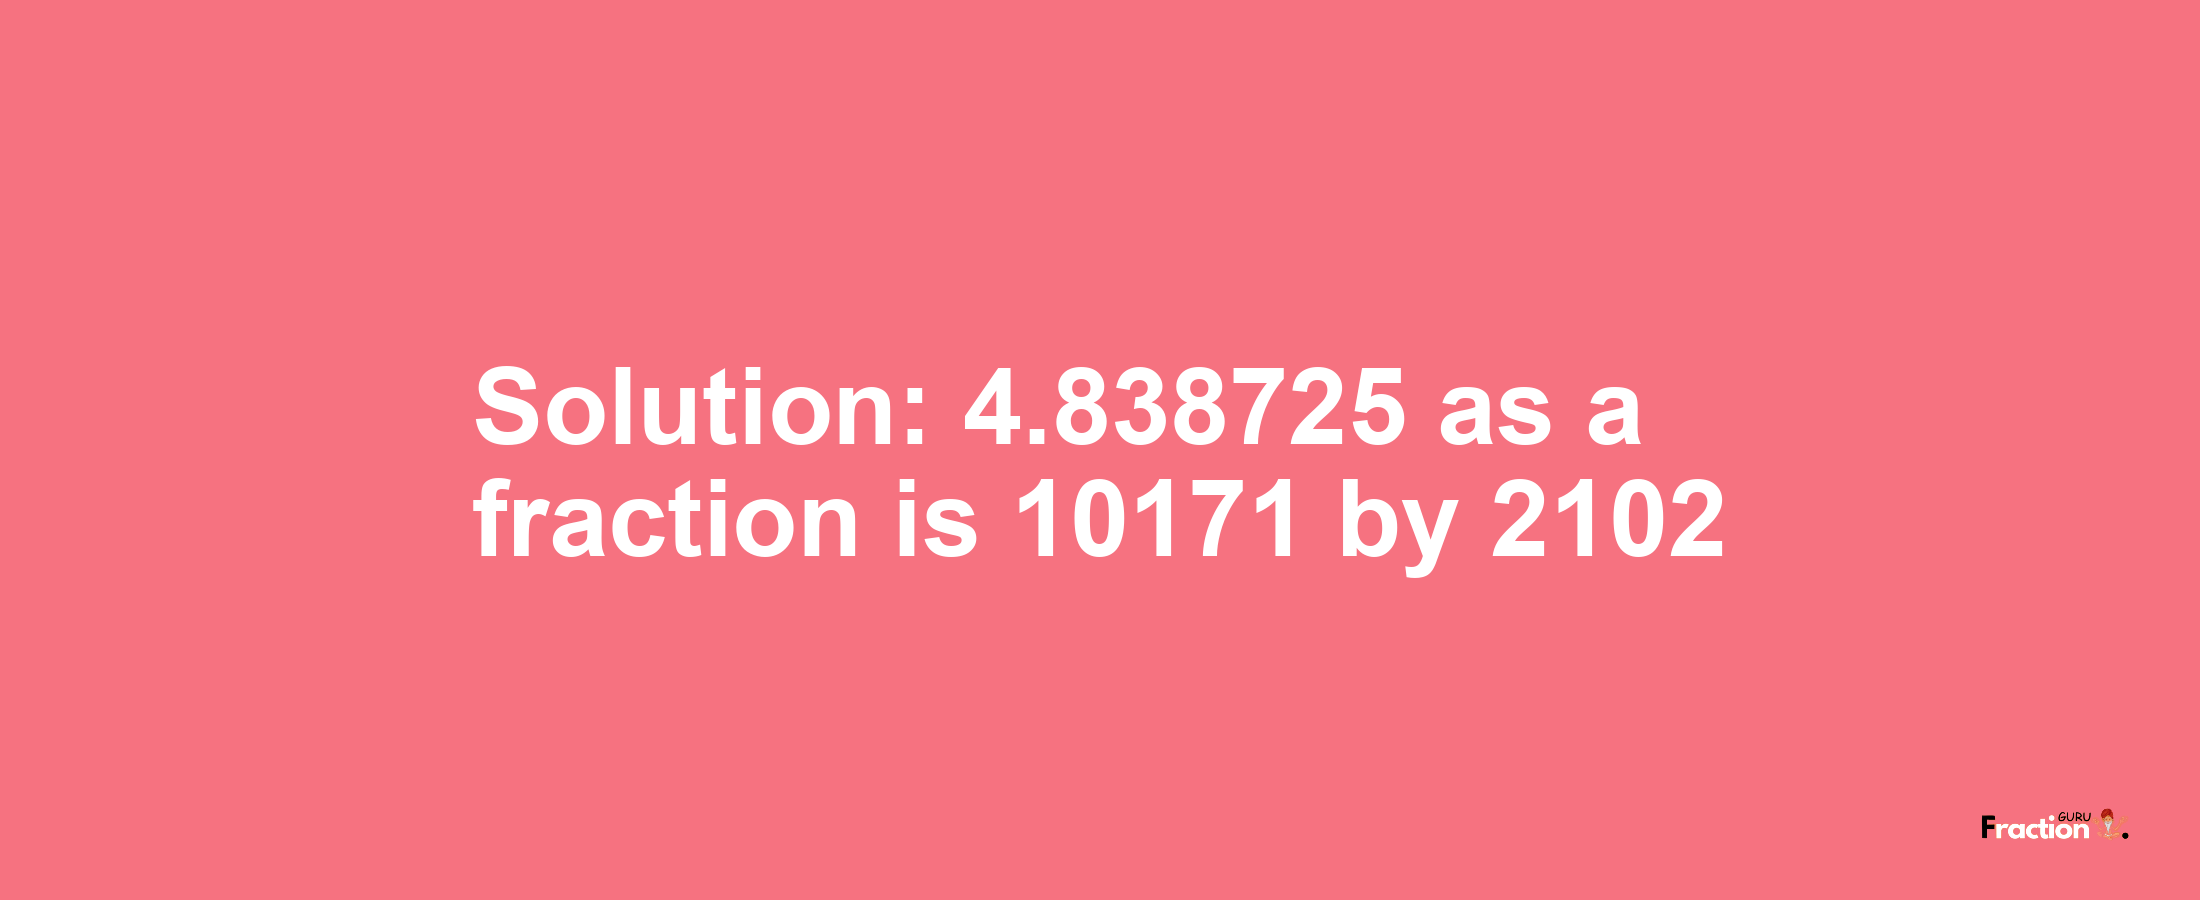 Solution:4.838725 as a fraction is 10171/2102